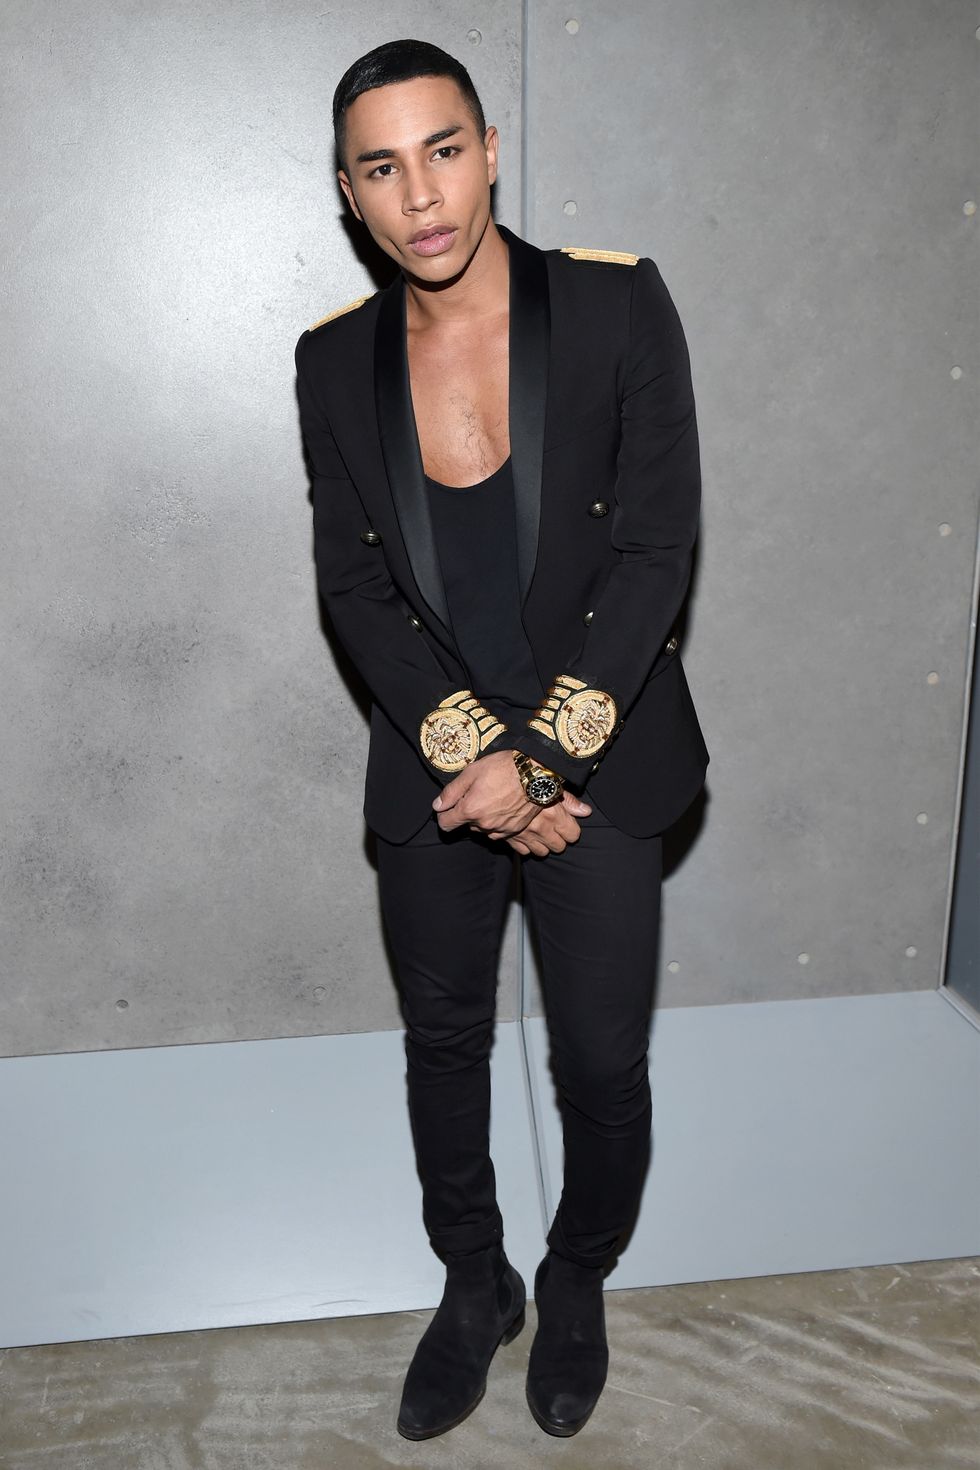 <p>Olivier Rousteing seemed to be the ultimate fashion prodigy when he attended the Ecole Supérieure des Arts et Techniques de la Mode in Paris as a teenager. A couple years after graduation, at the age of 20, he began his career as a designer for Roberto Cavalli. He was quickly promoted to the head of the Italian label's women's ready-to-wear collection, where he served five years as the creative director.</p>